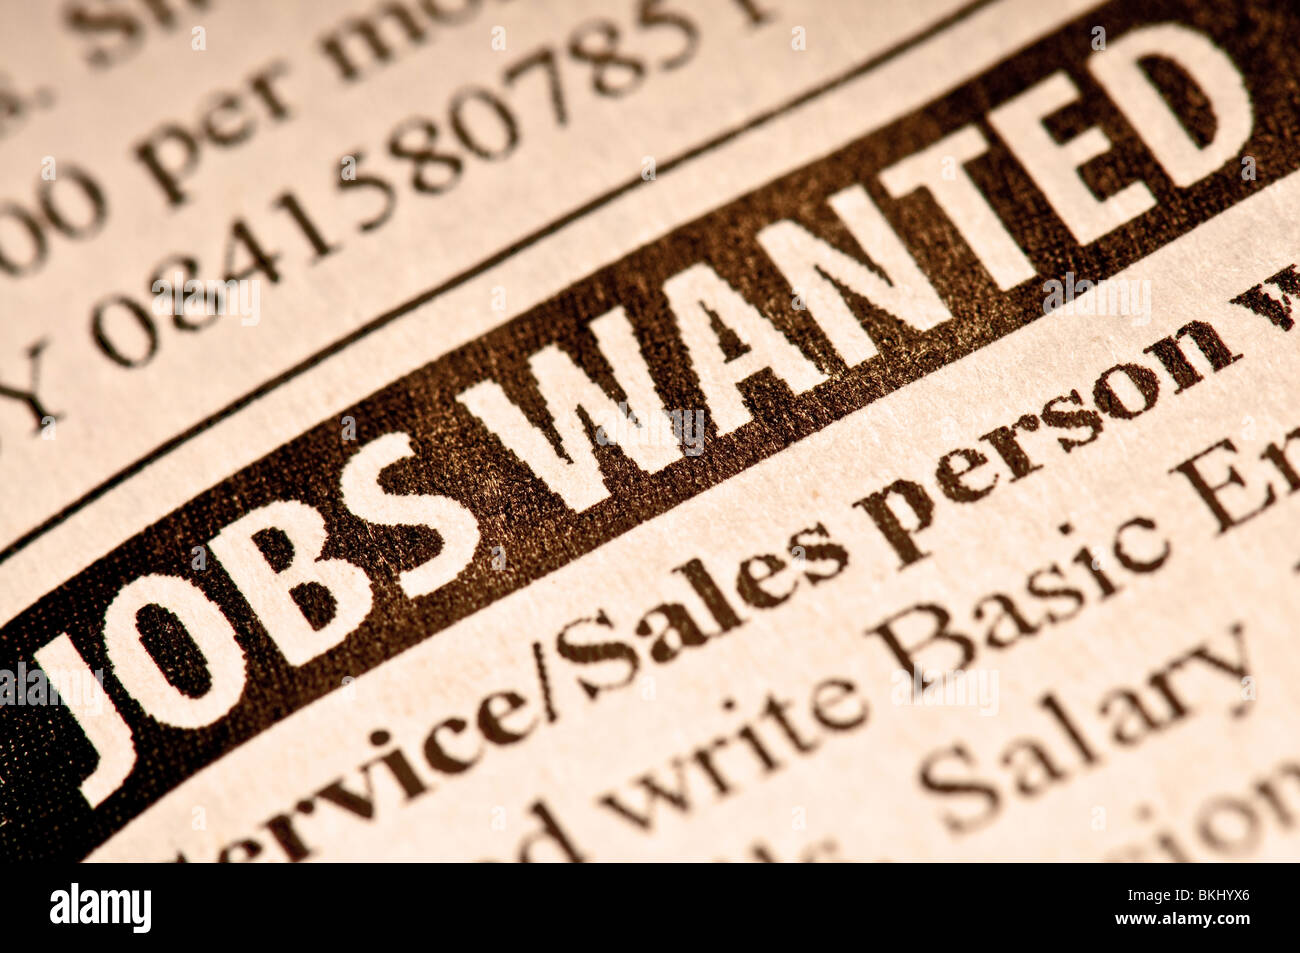 Jobs wanted. Employment classified in a newspaper. Stock Photo